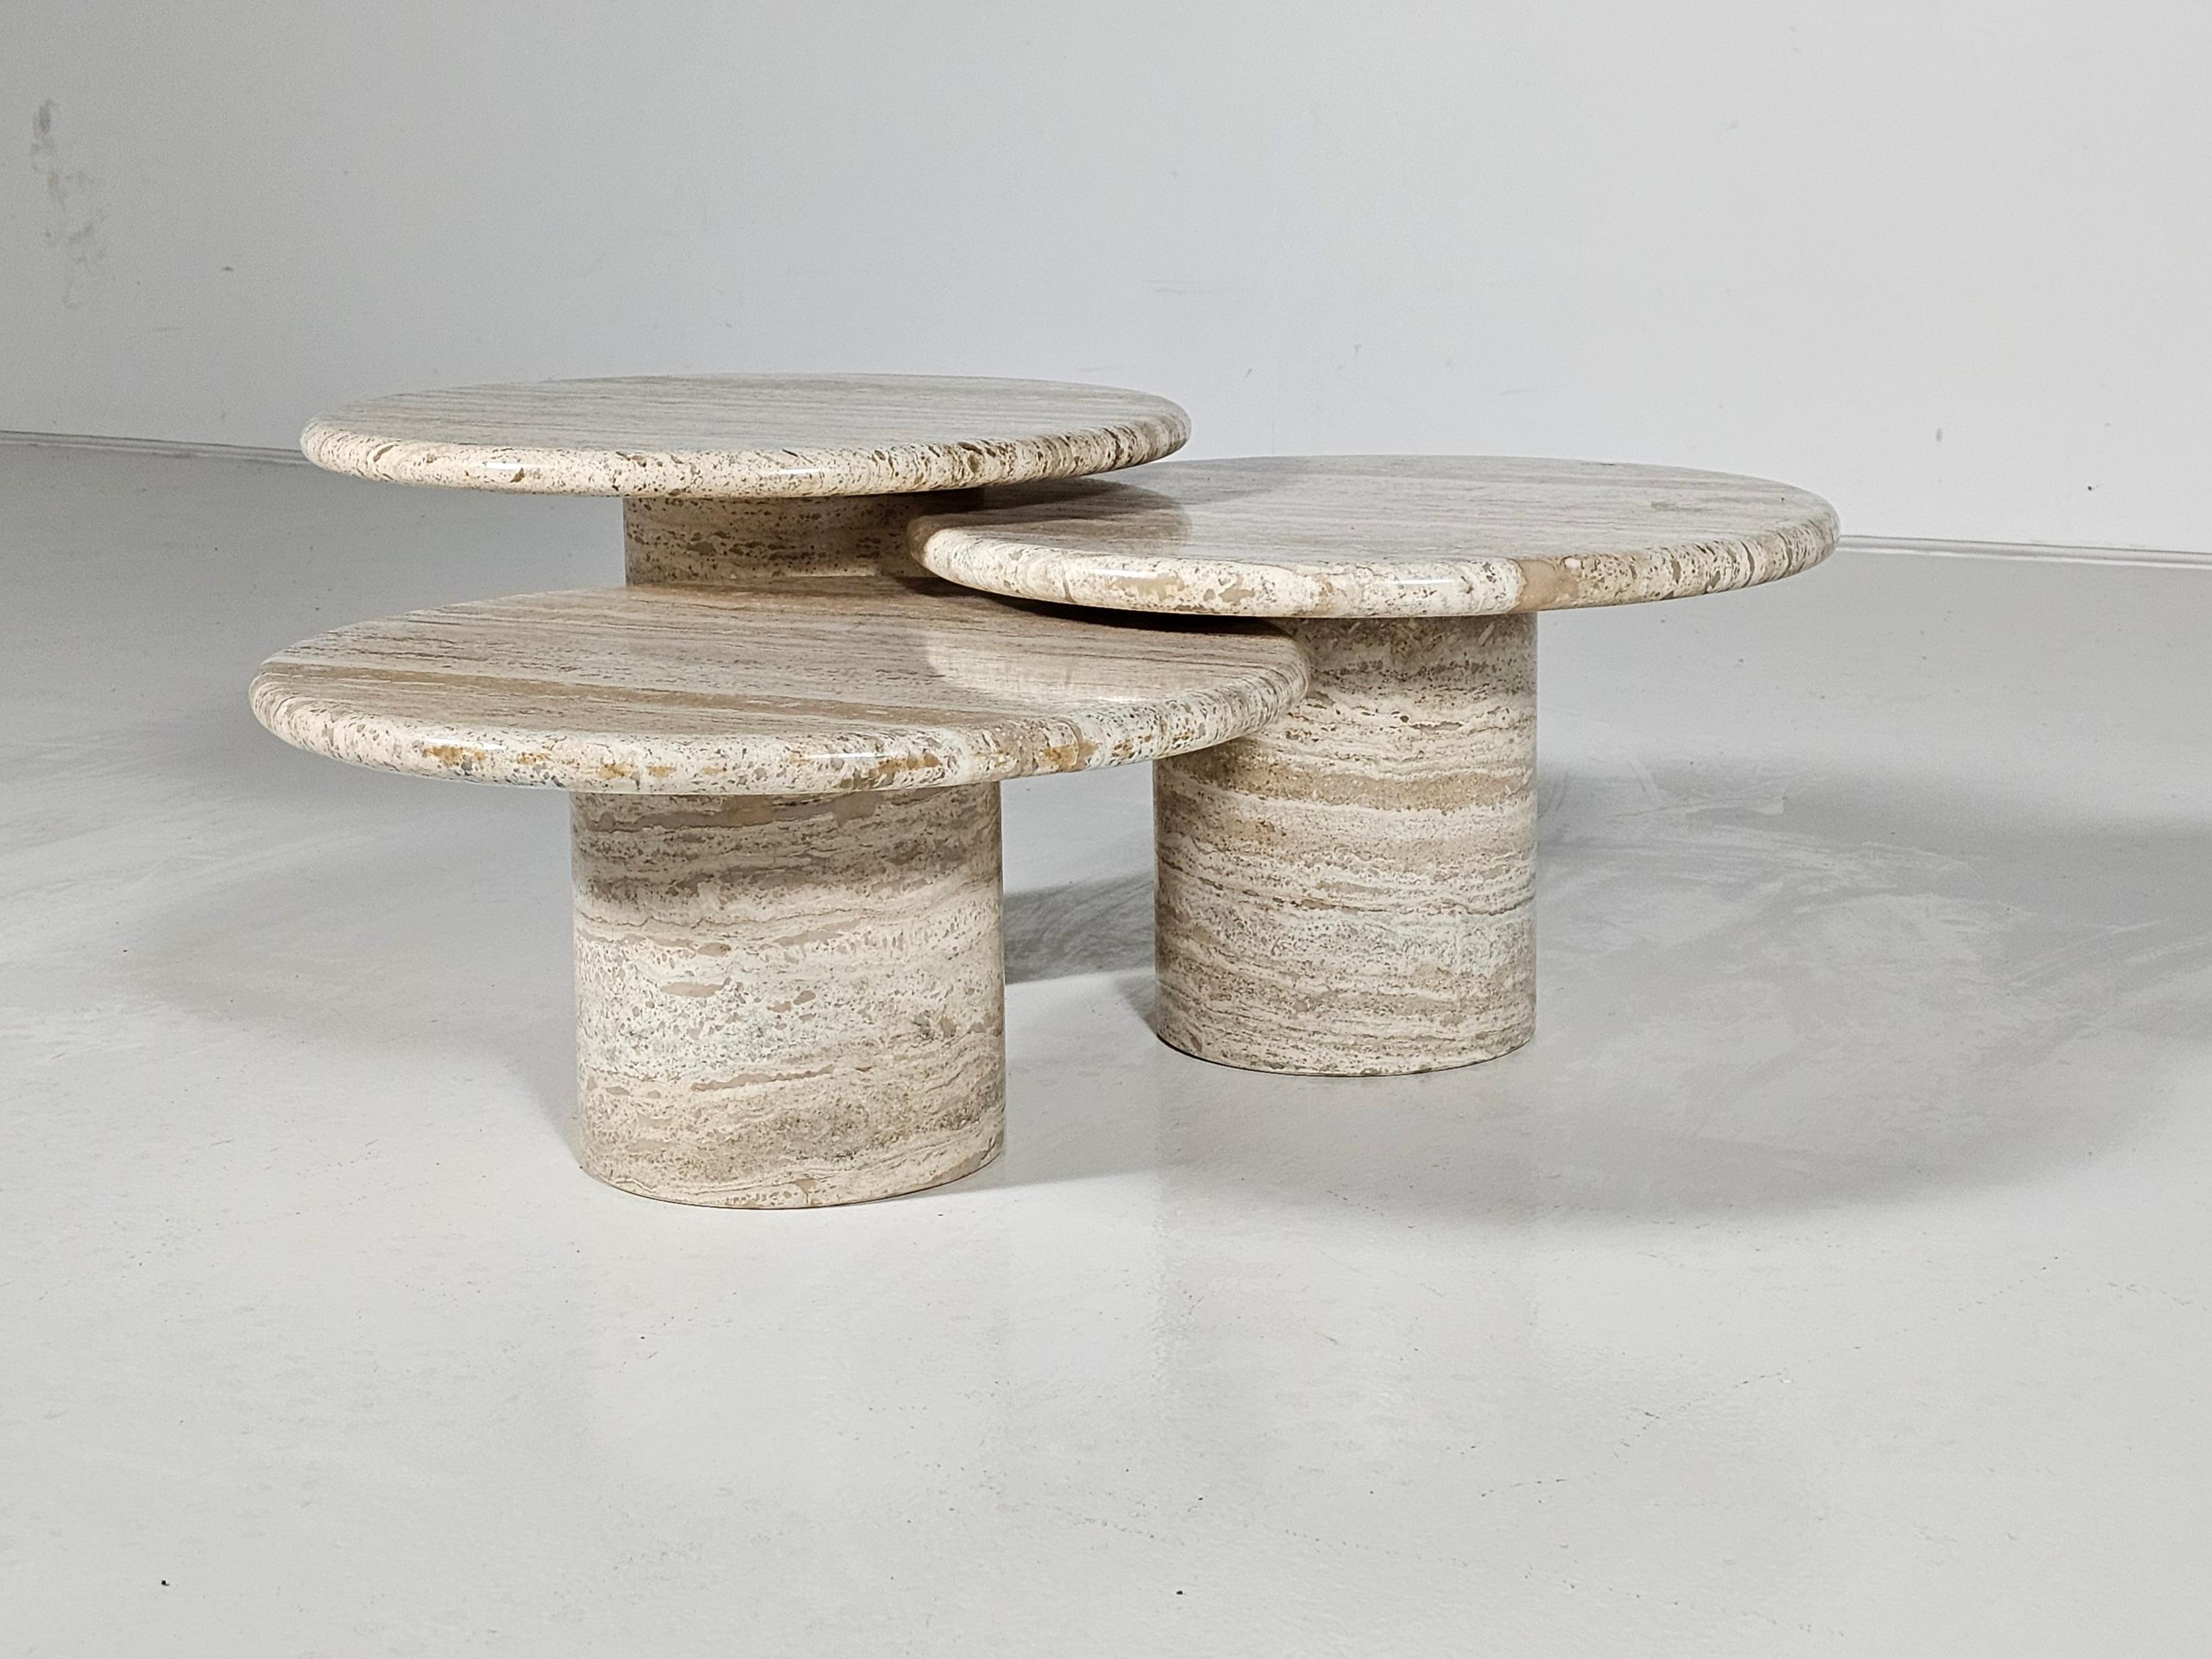 Set of three coffee tables, travertine, Italy, 1970s

This set of cocktail tables features an elegant design that clearly illustrates a balanced look. The circular tables have no joints or clamps and are architectural in their structure. Each